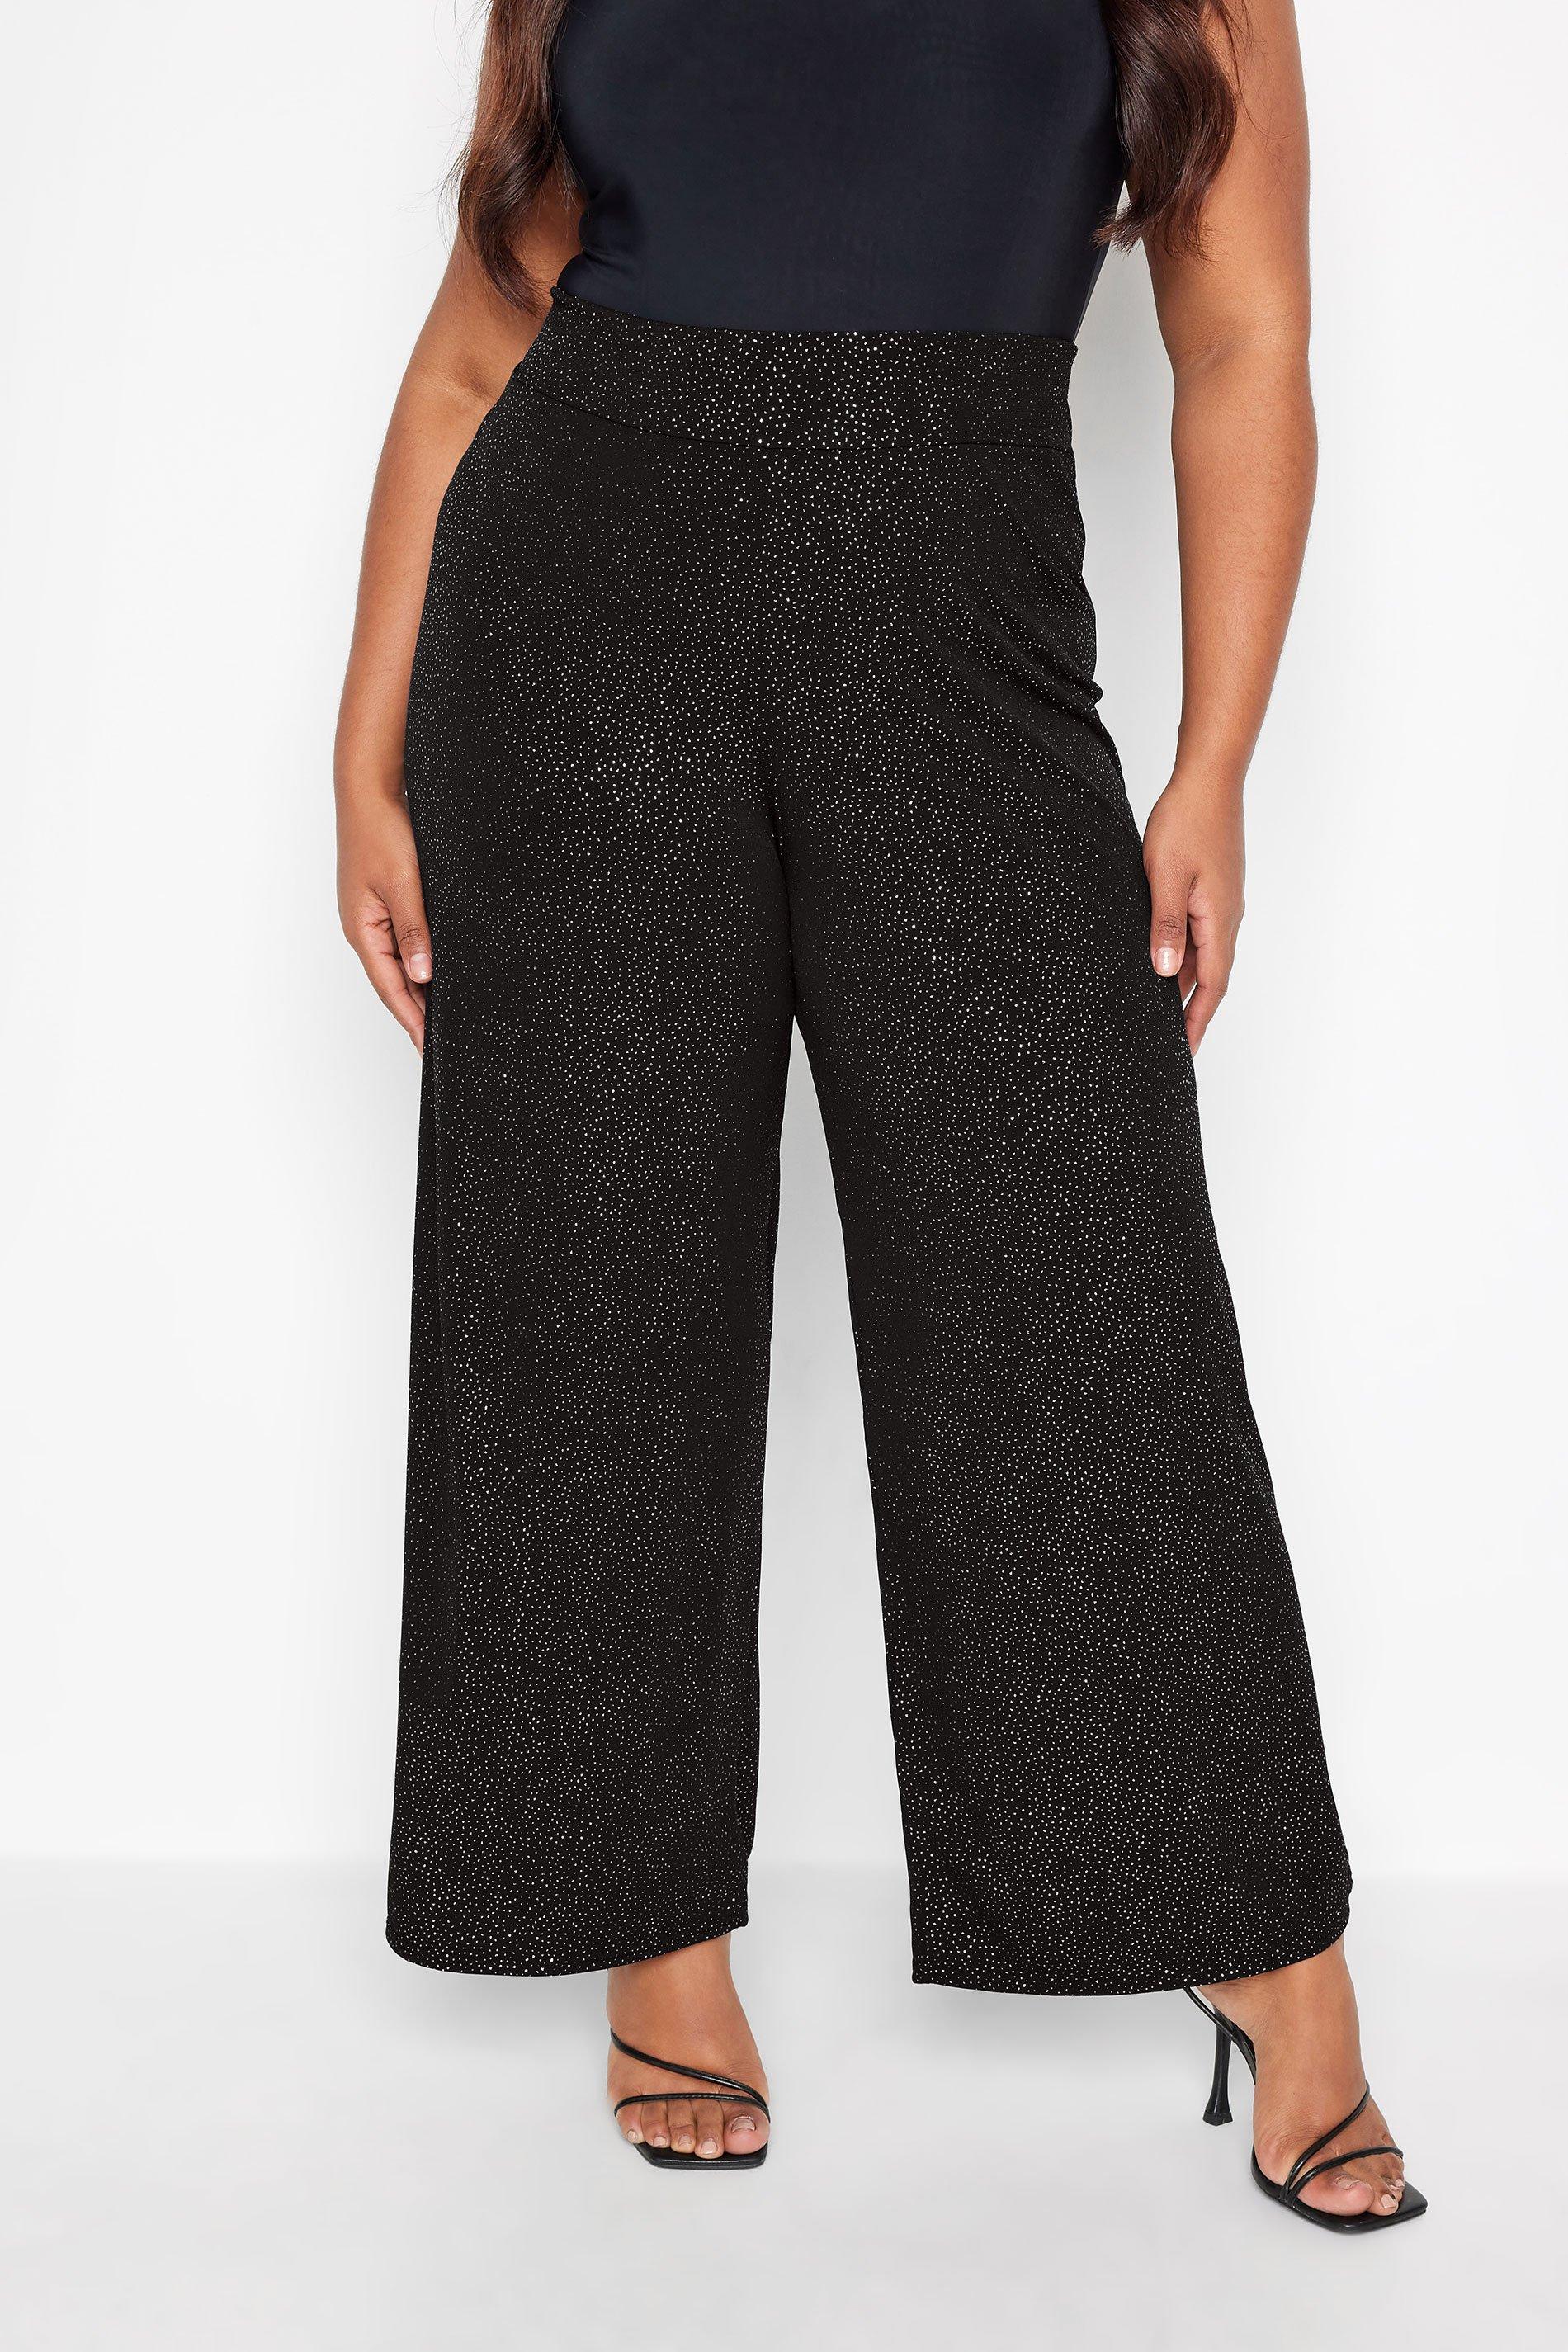 Going Out Joggers Women's Pants & Trousers - Macy's